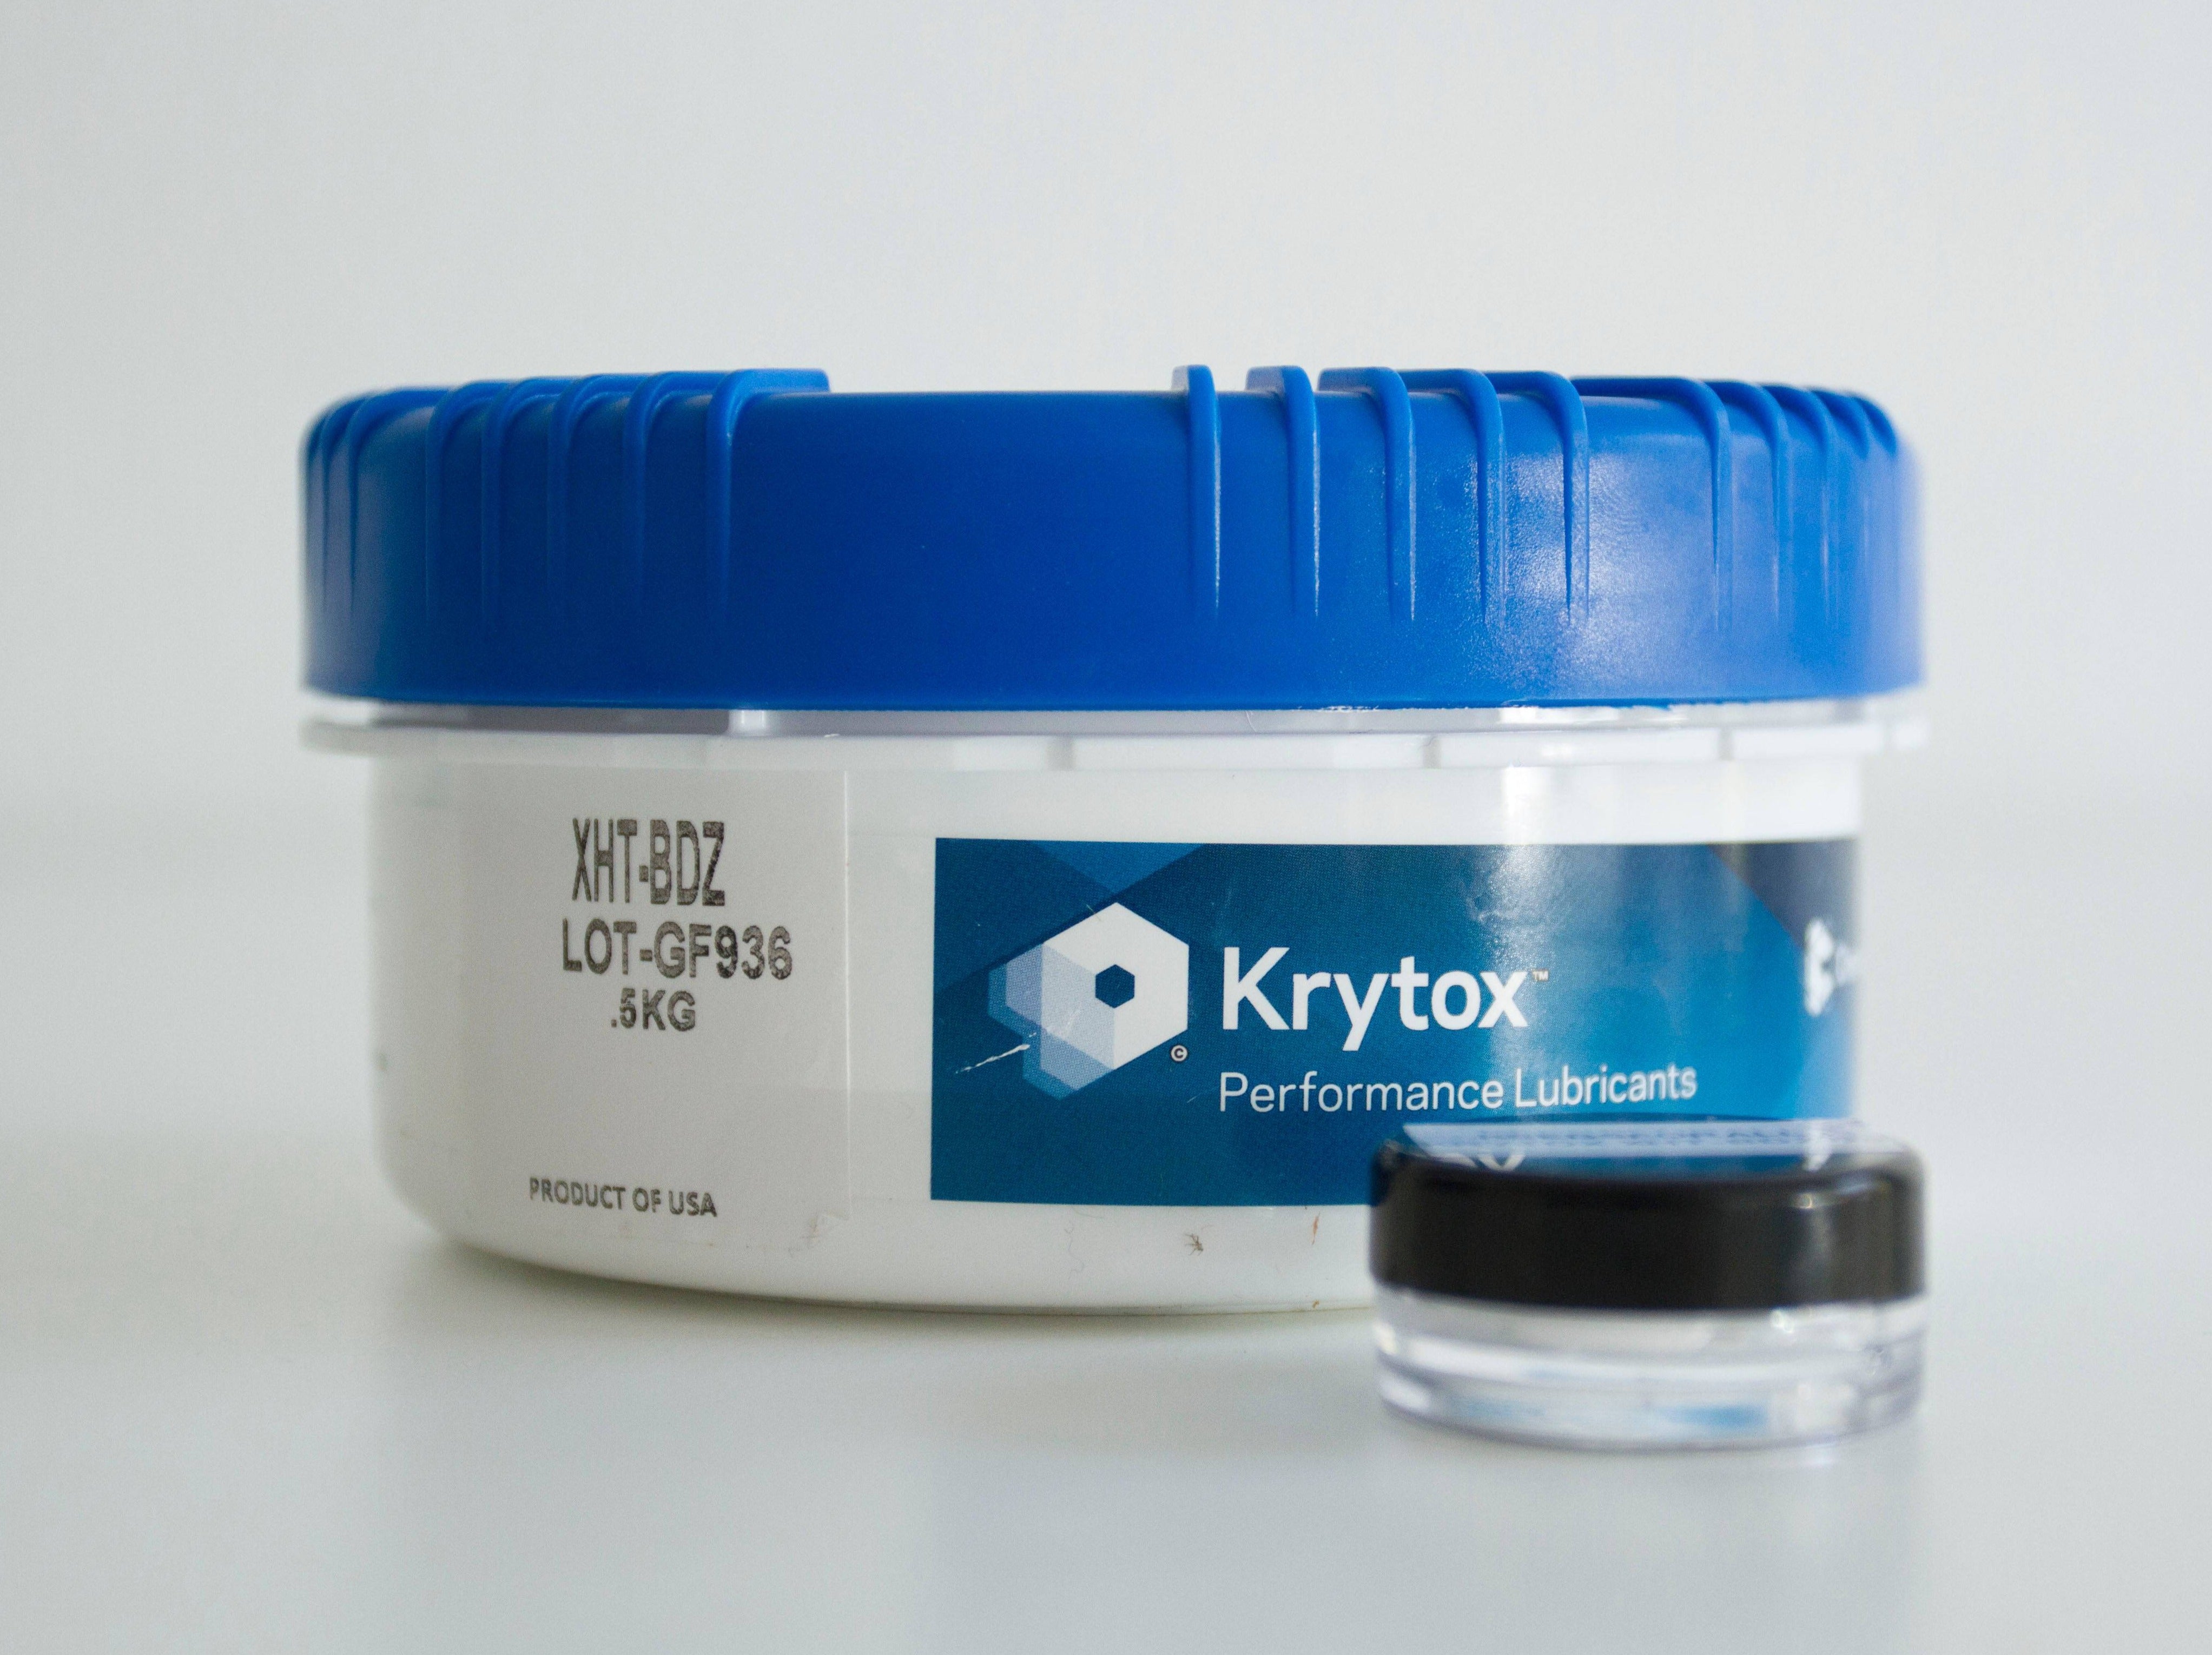 Krytox XHT-BDZ 3g & 5g. Higher quality version of Permatex Dielectric Grease.